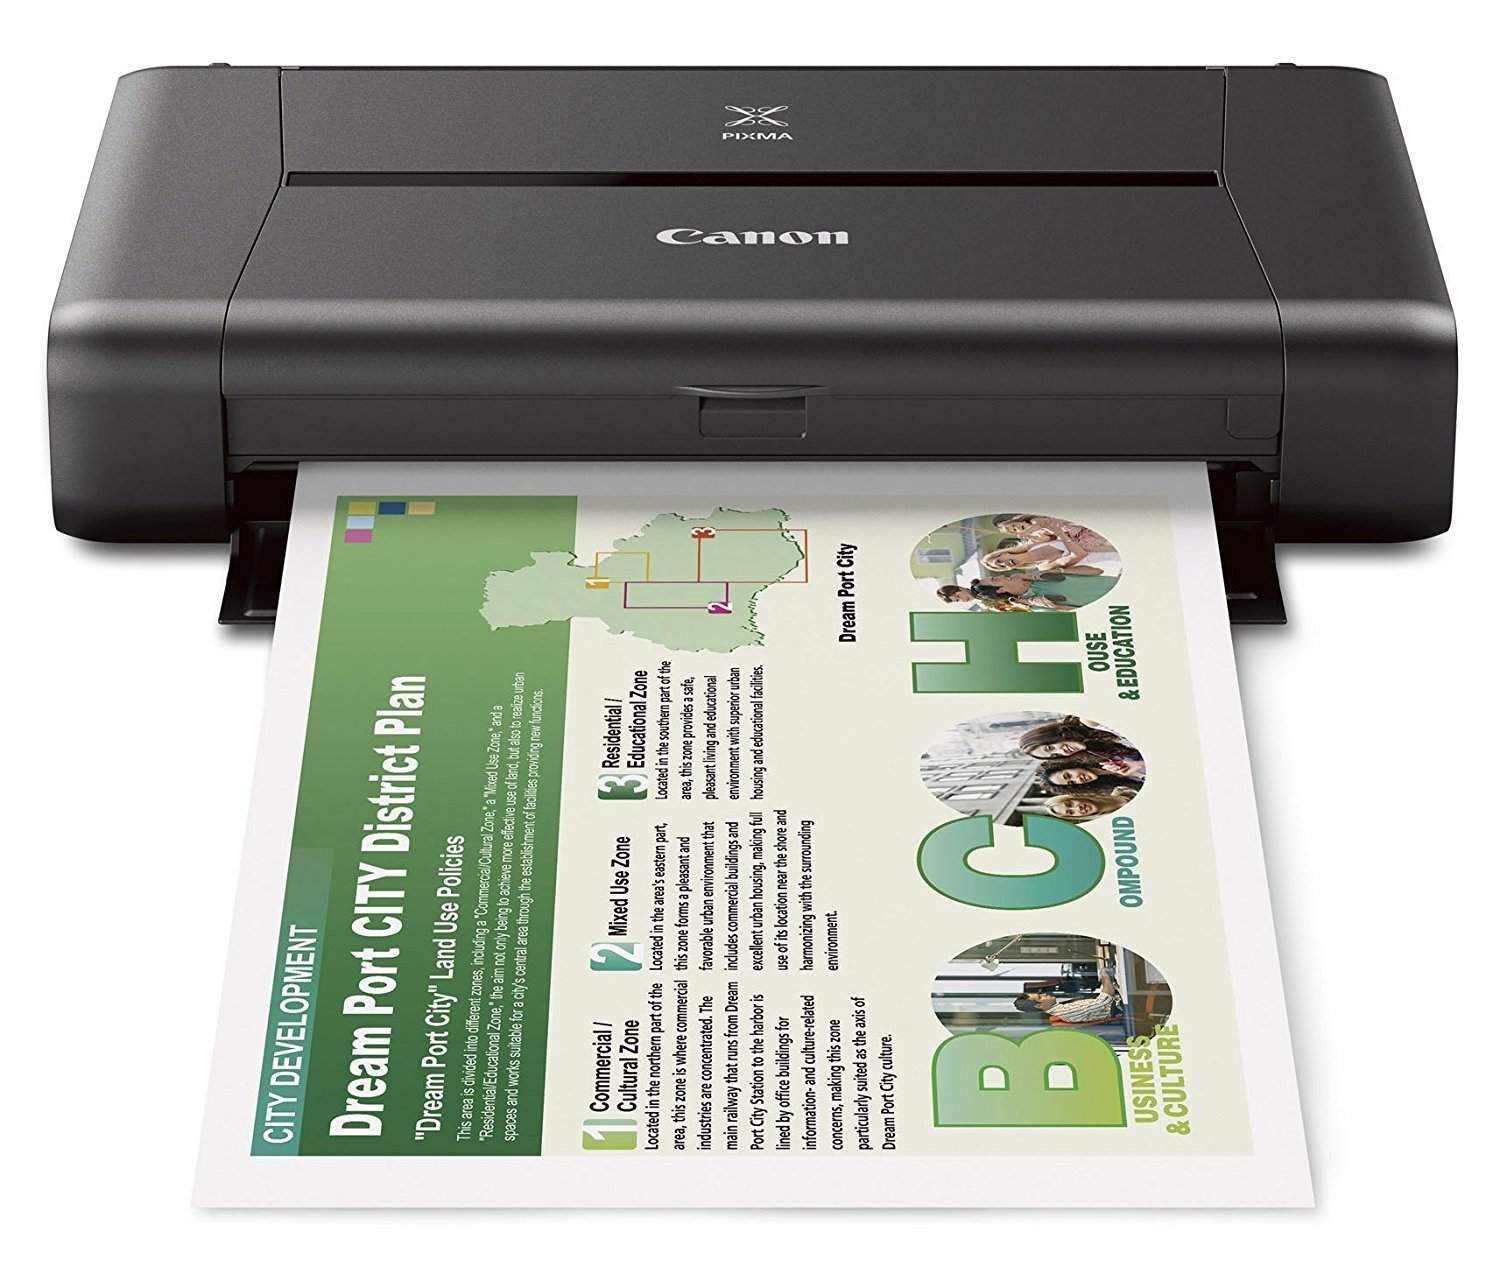 Best Printers For Mac And Pc